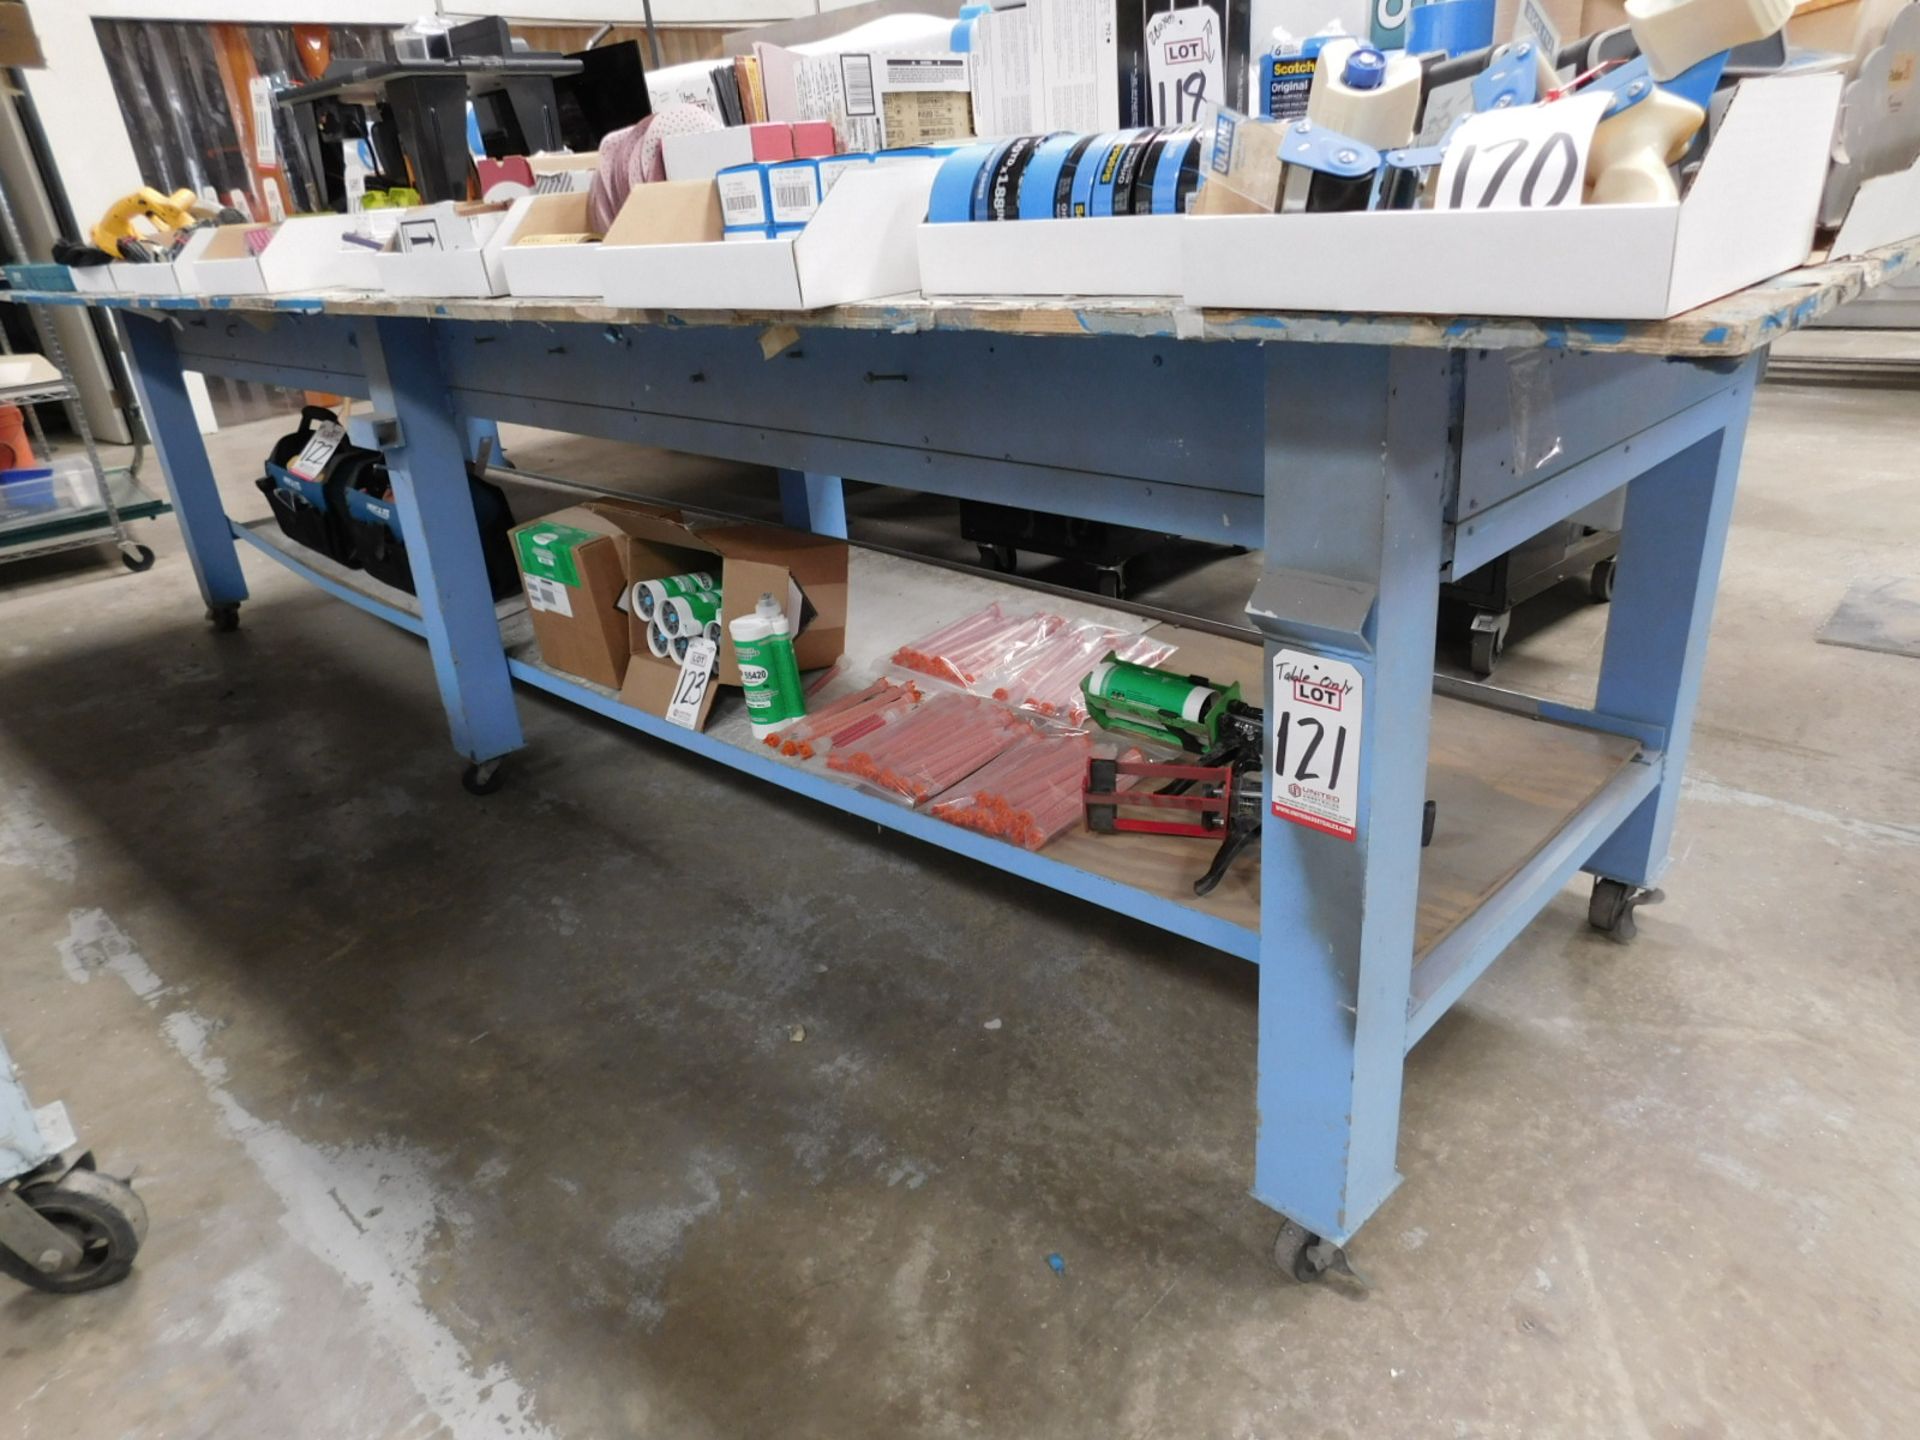 HEAVY DUTY ALUMINUM TABLE, 13' X 4', ON LOCKABLE CASTERS, PLYWOOD TOP, TABLE ONLY, CONTENTS NOT